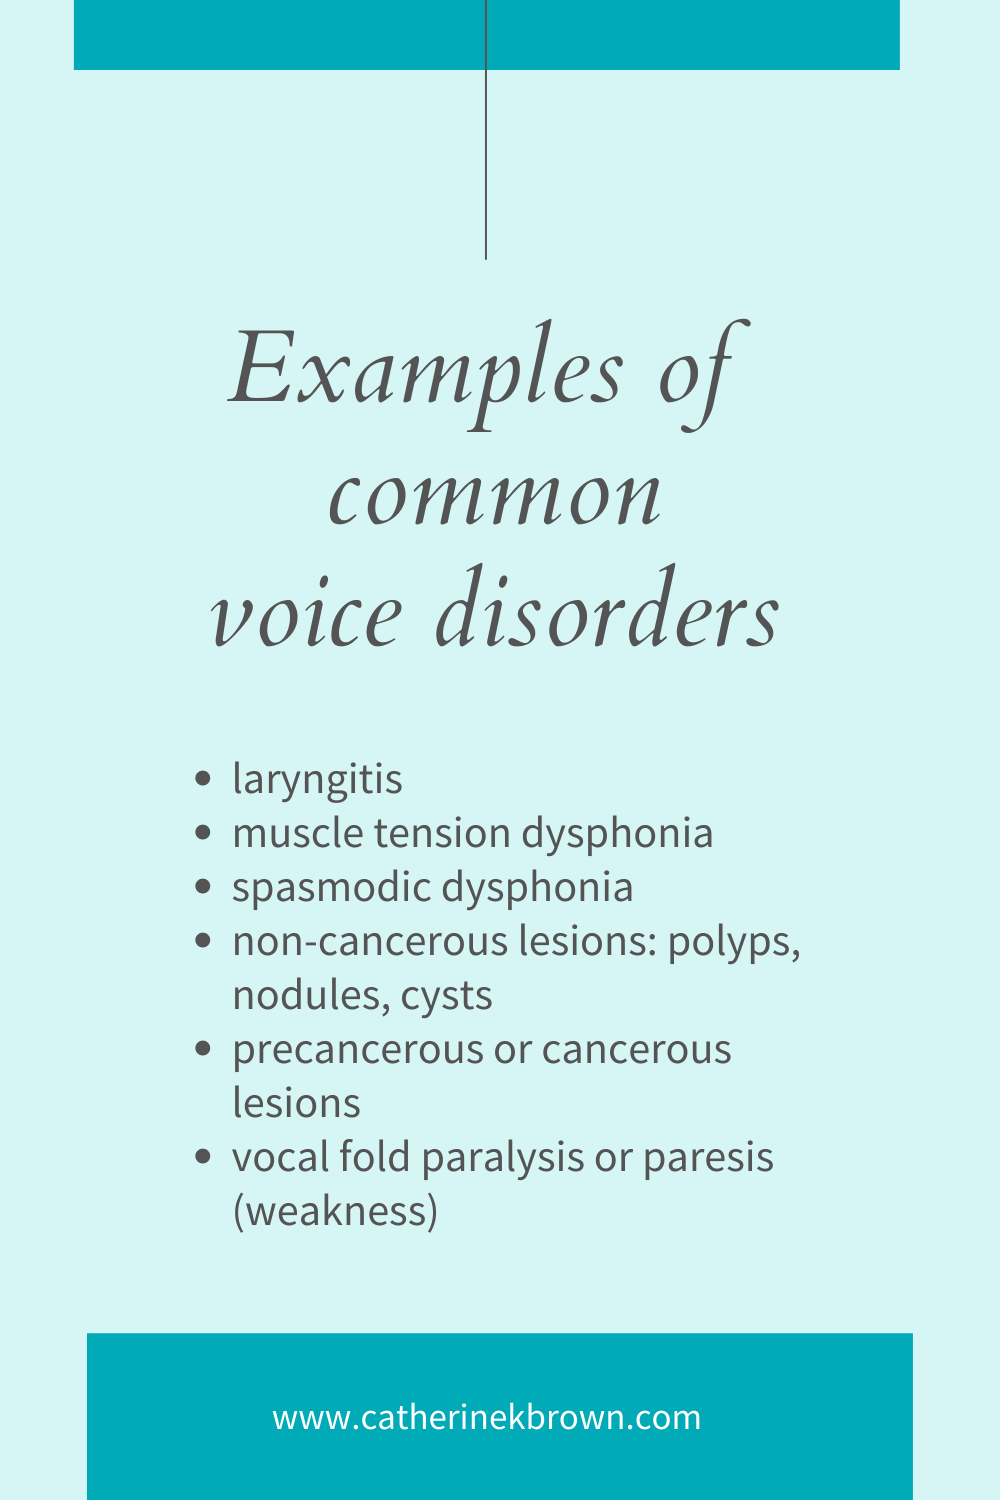 Examples of common voice disorders